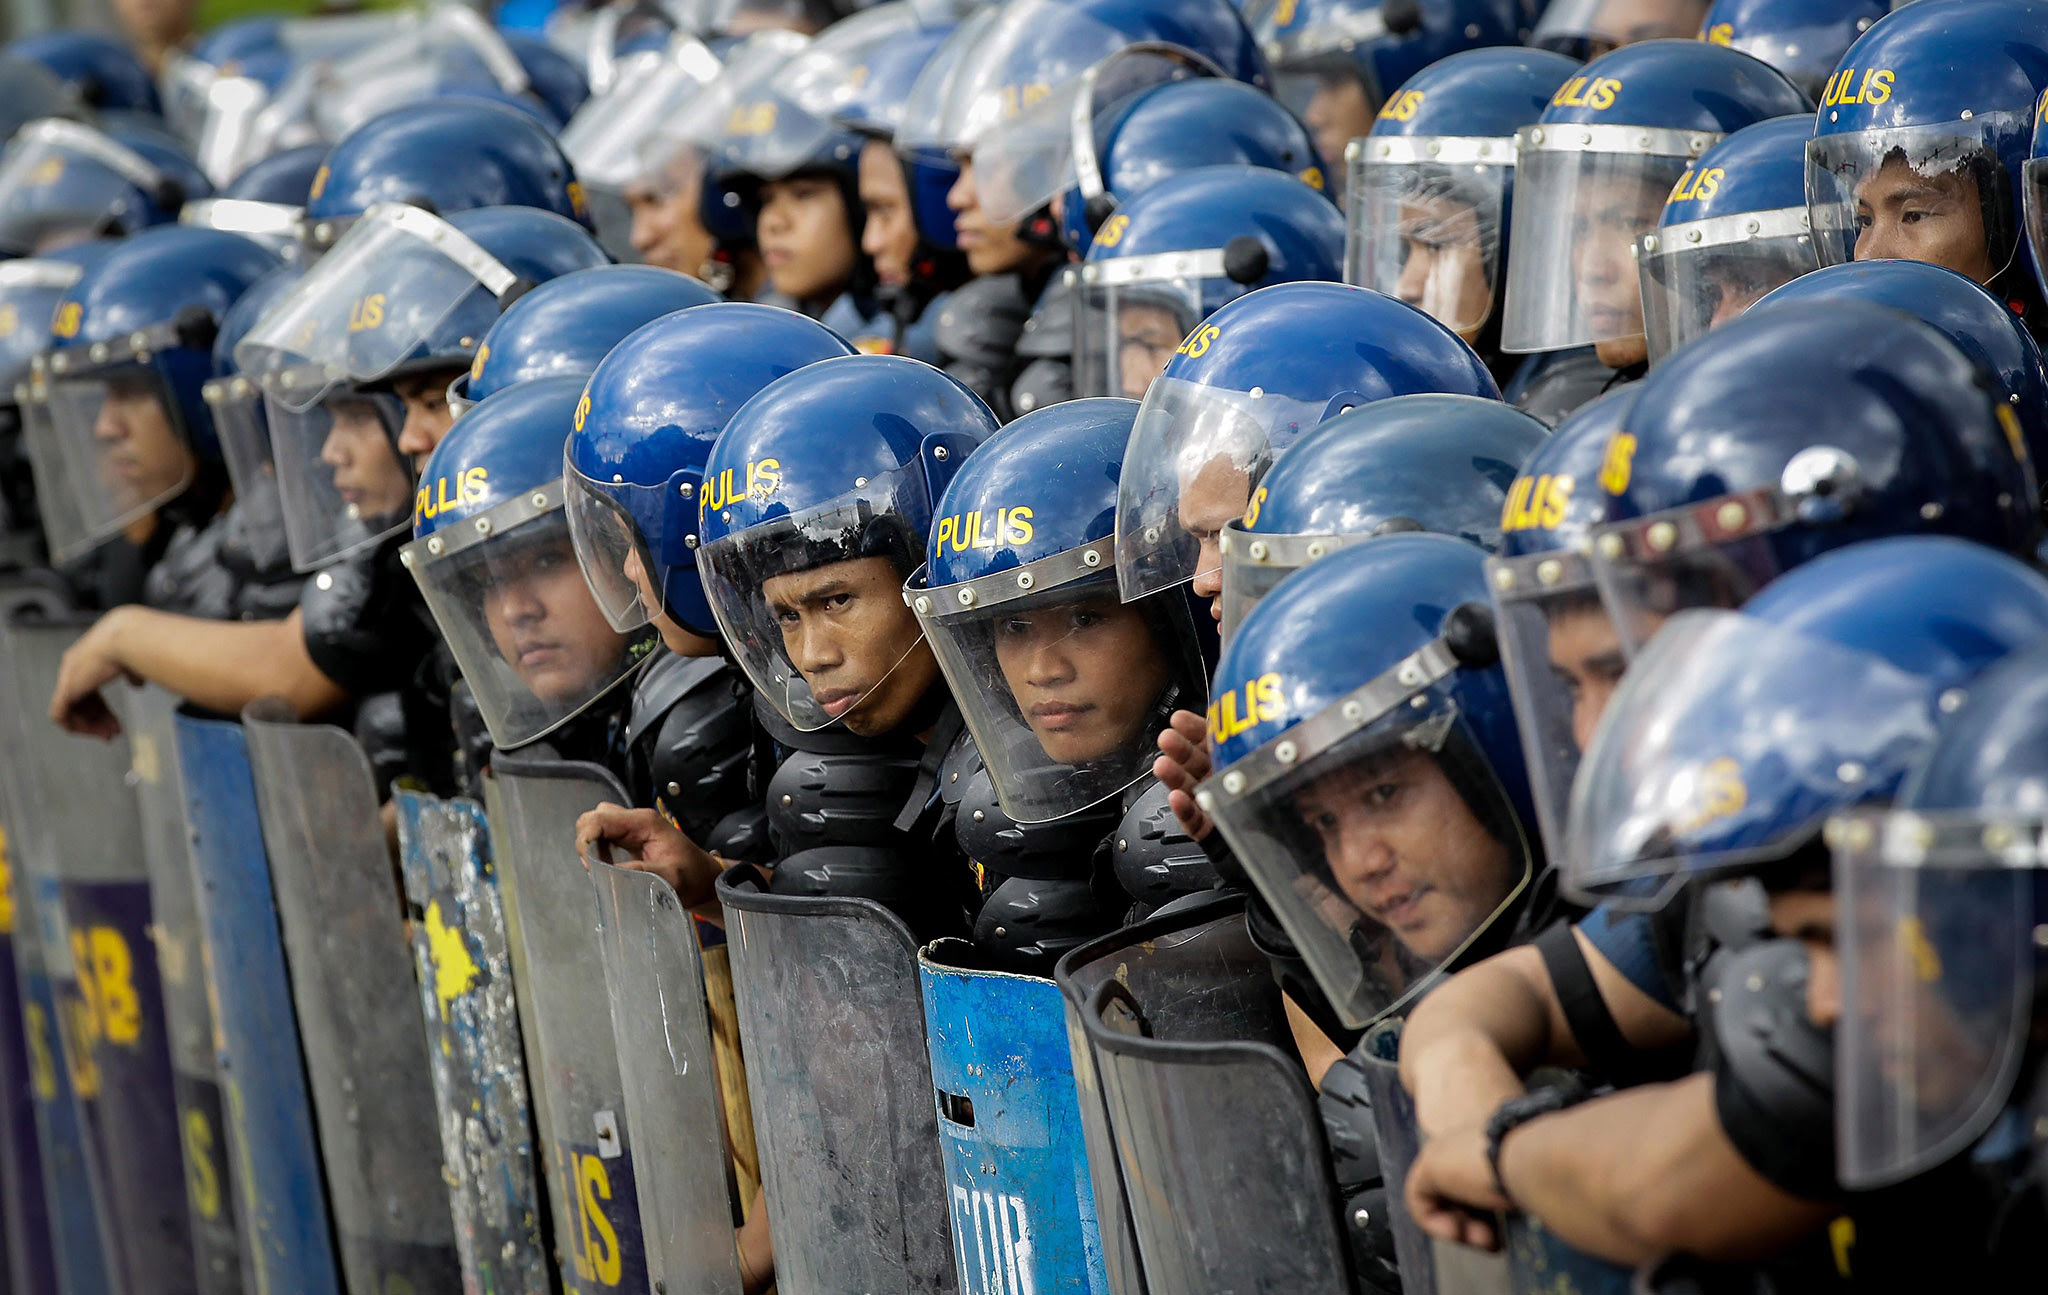 Filipino anti-riot police stand guard during a protest near the US Embassy in Manila, Philippines, 27 October 2016. Hundreds of protesters including Indigenous People, students and militant groups marched towards the US Embassy to protest against the presence of US military troops and condemning the violent dispersal on 19 October which left at least forty people hurt including twenty police officers and three people who were run over by a police van.  EPA/MARK R. CRISTINO